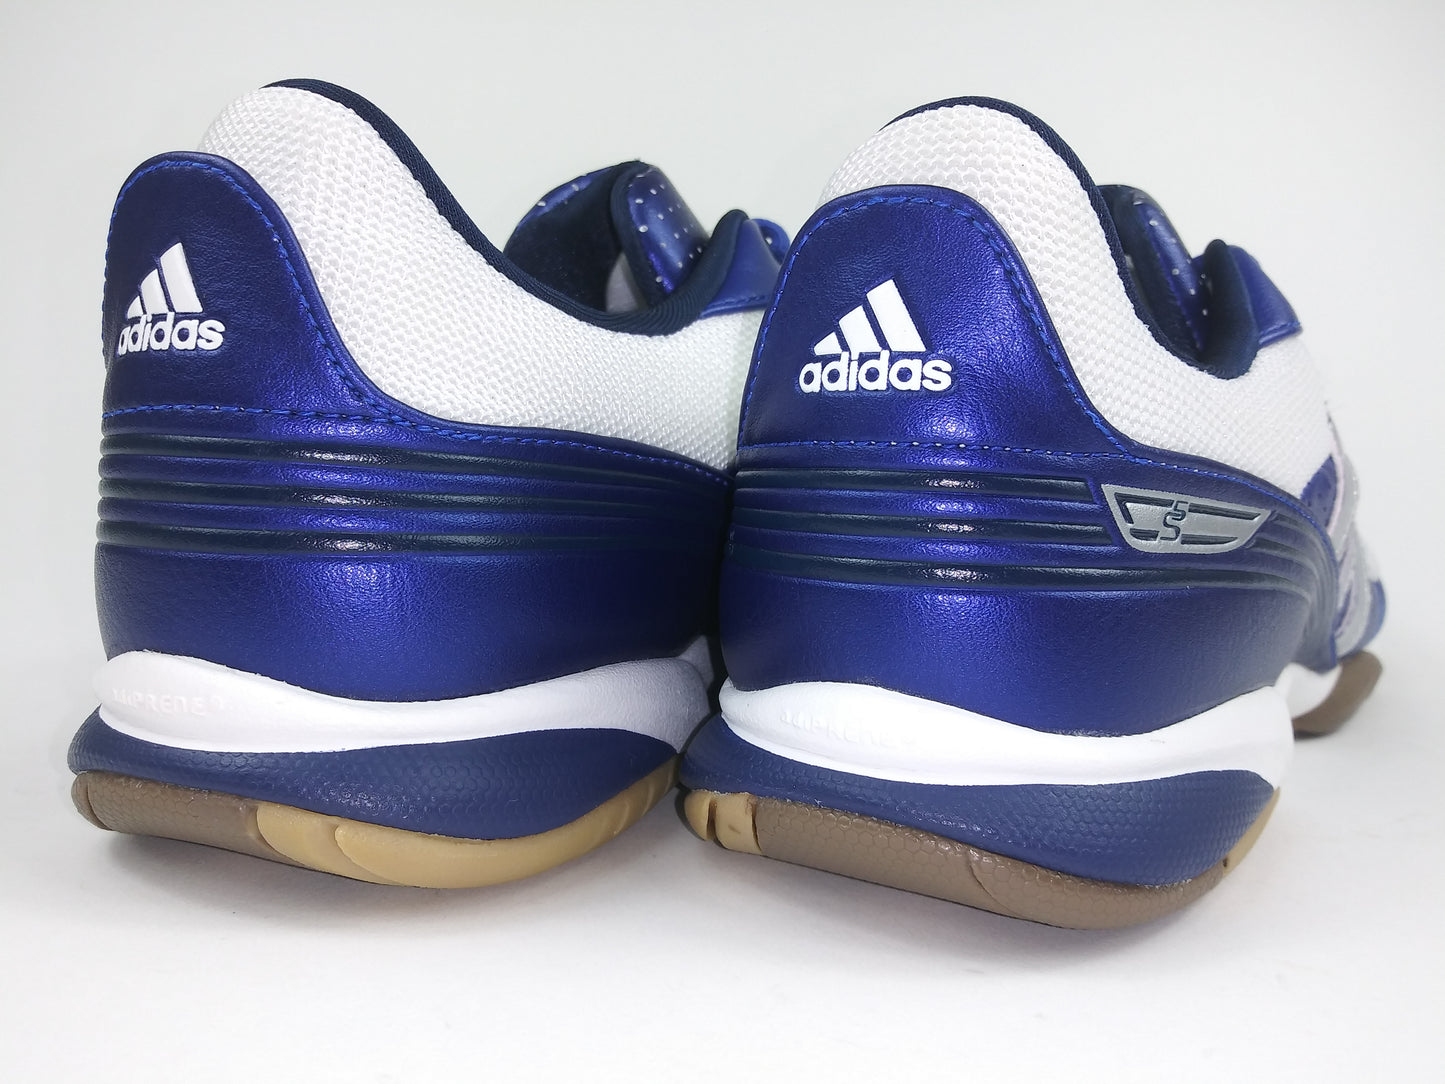 Adidas Top Sala Vll Indoor Shoes Blue White